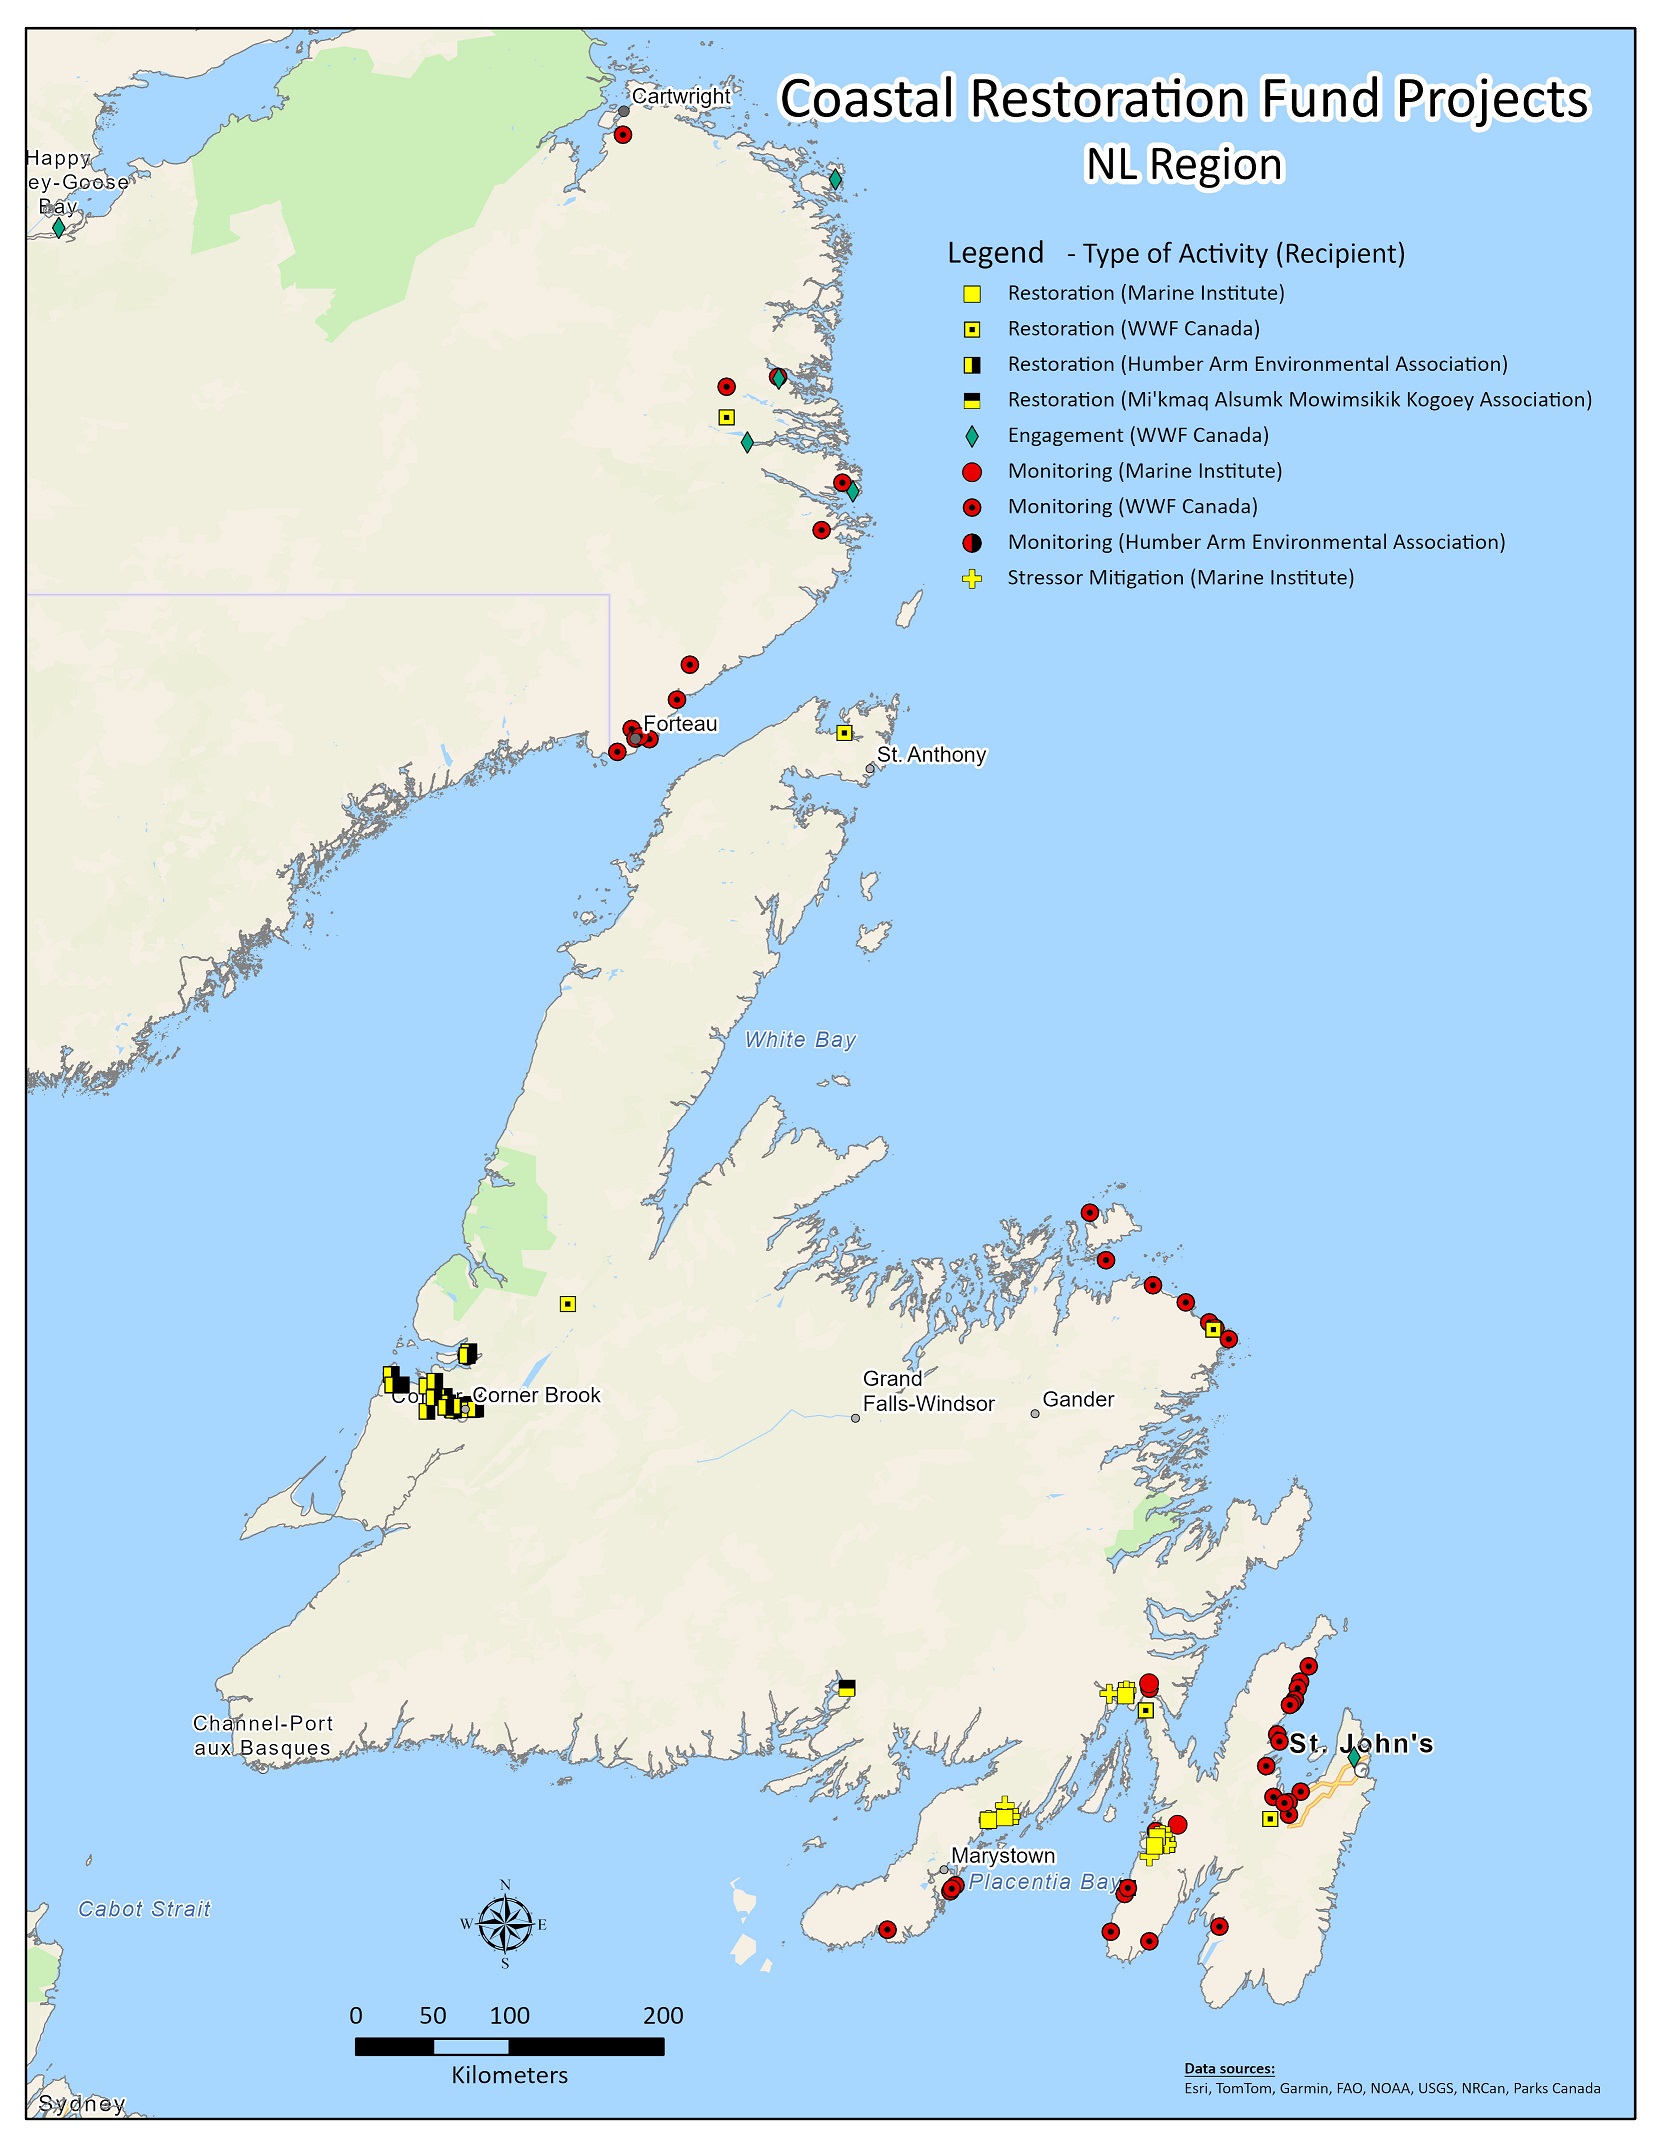 Map showing the physical locations of Coastal Restoration Fund (CRF) projects funded by DFO in Newfoundland and Labrador, with symbols indicating type of activity and name of recipient